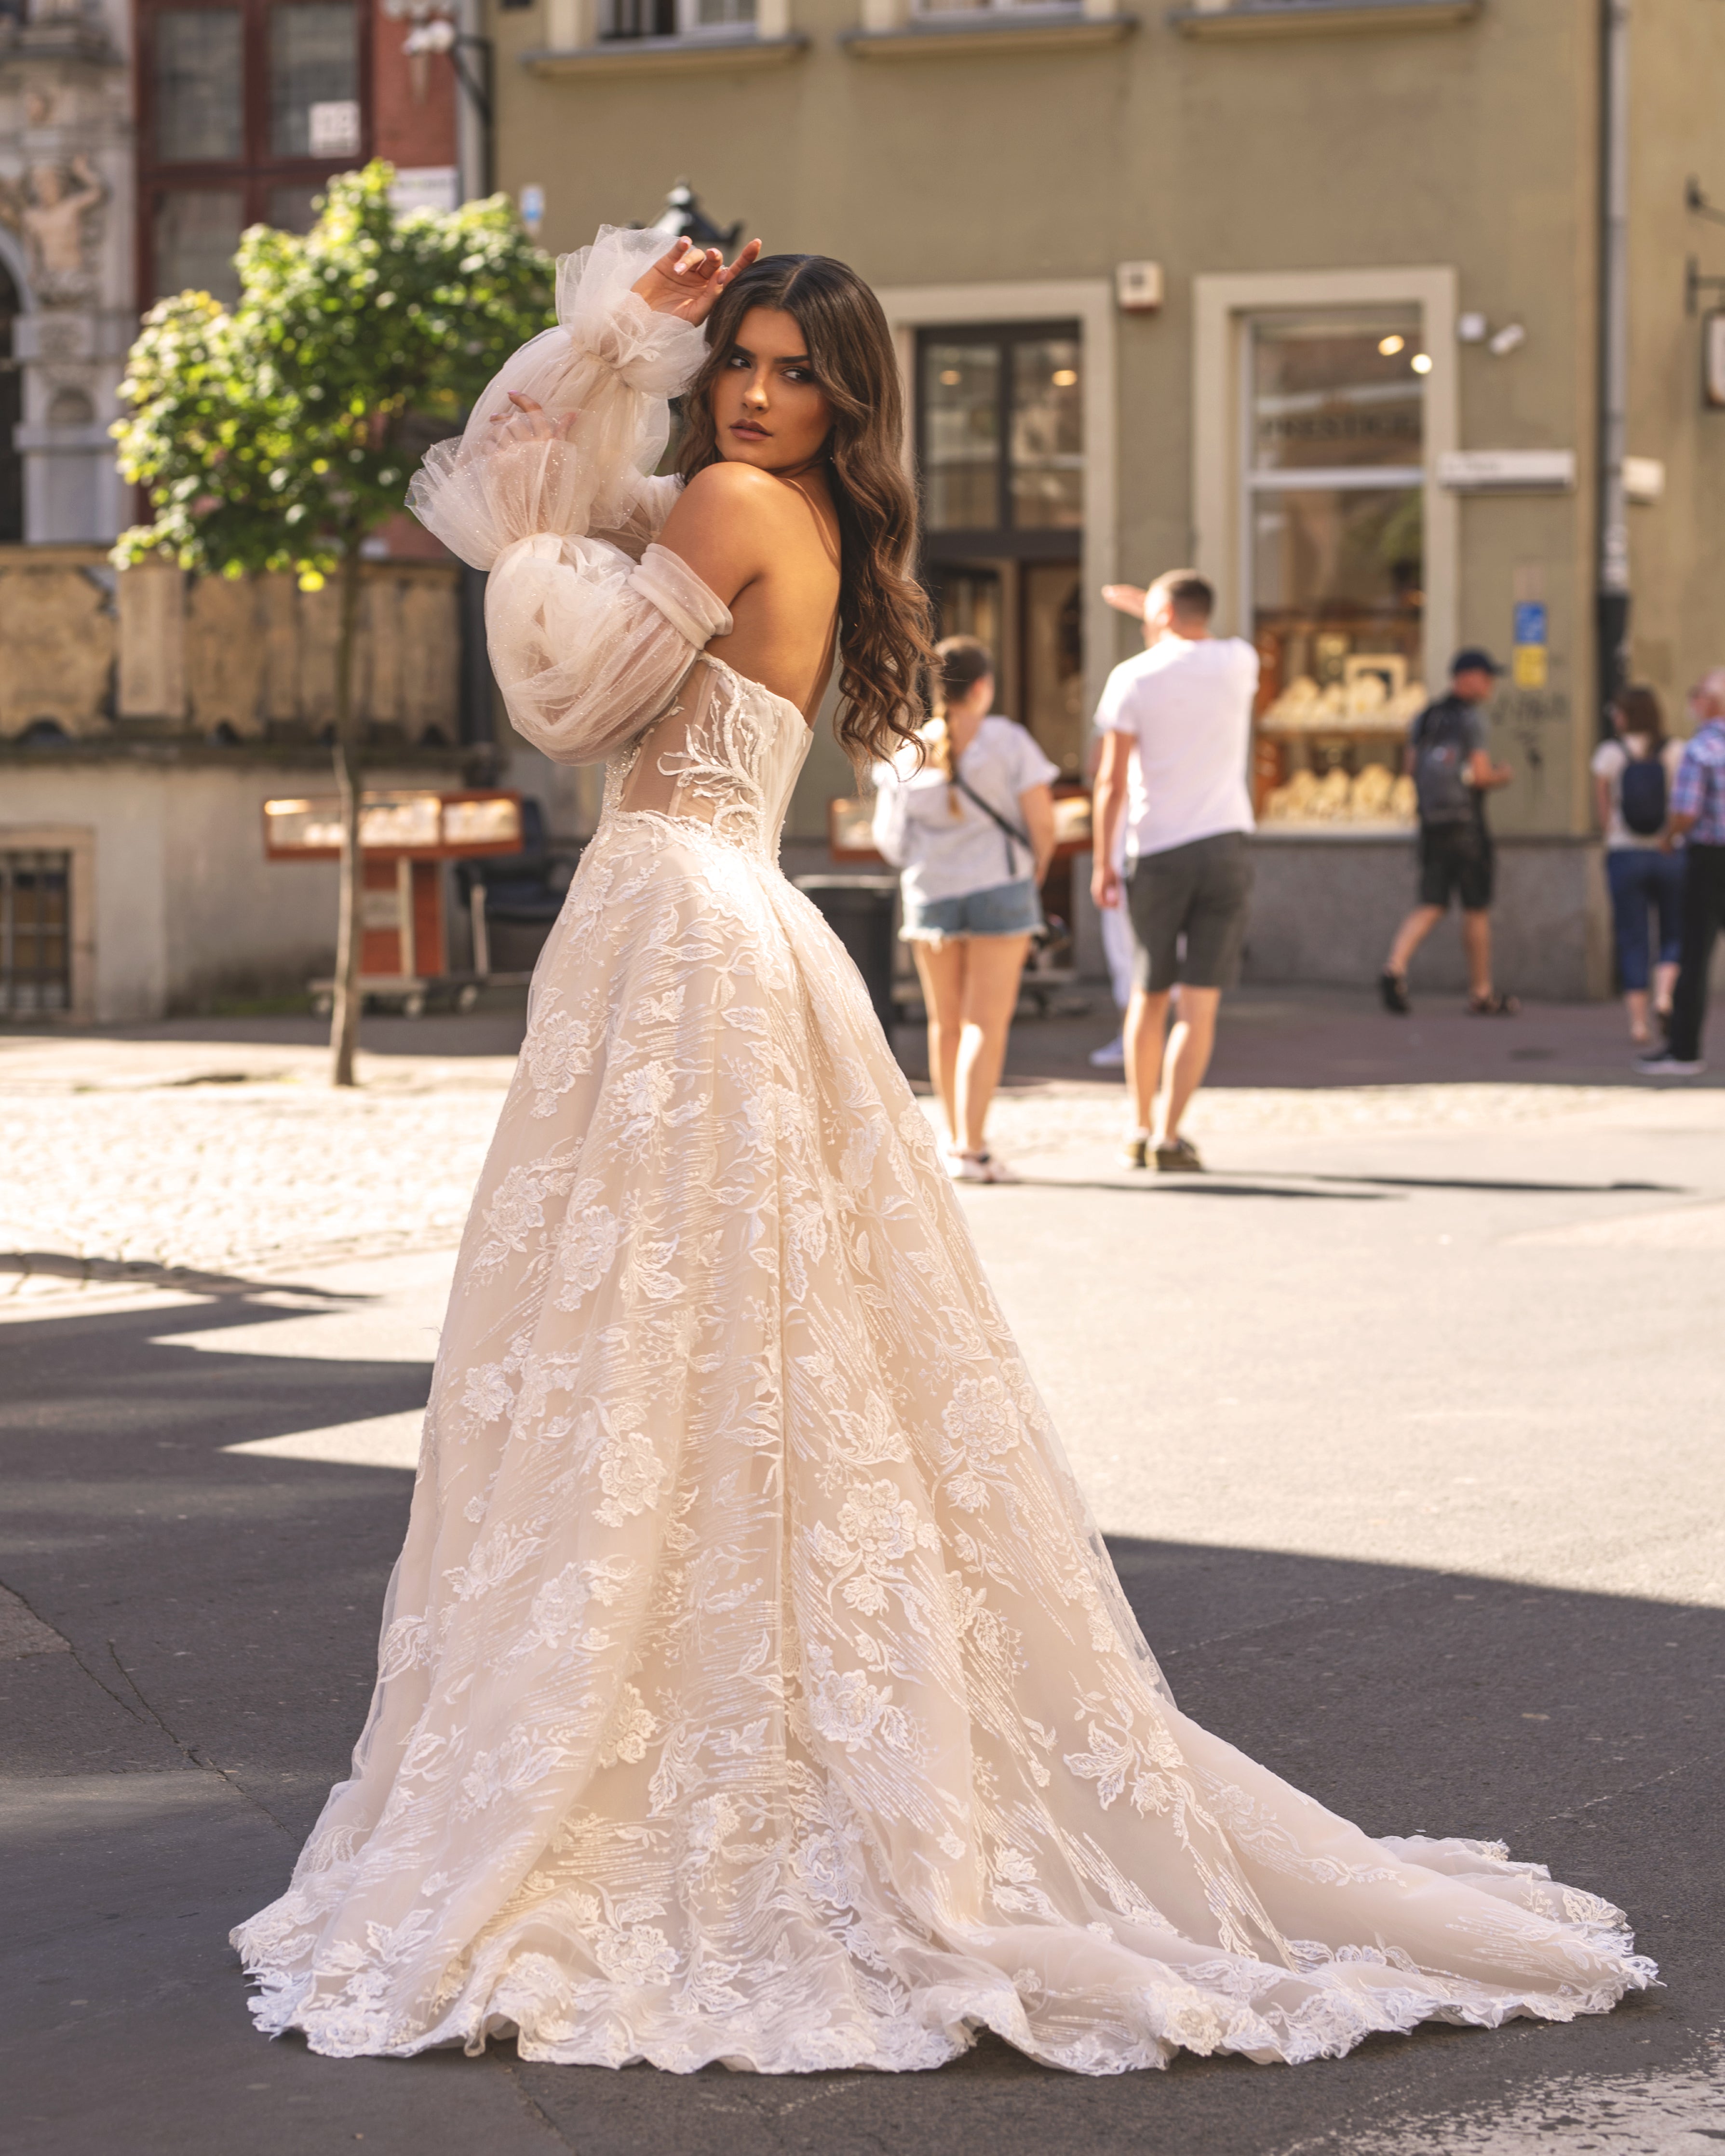 Michelle - Bohemian Nude Wedding Dress with Floral Applique